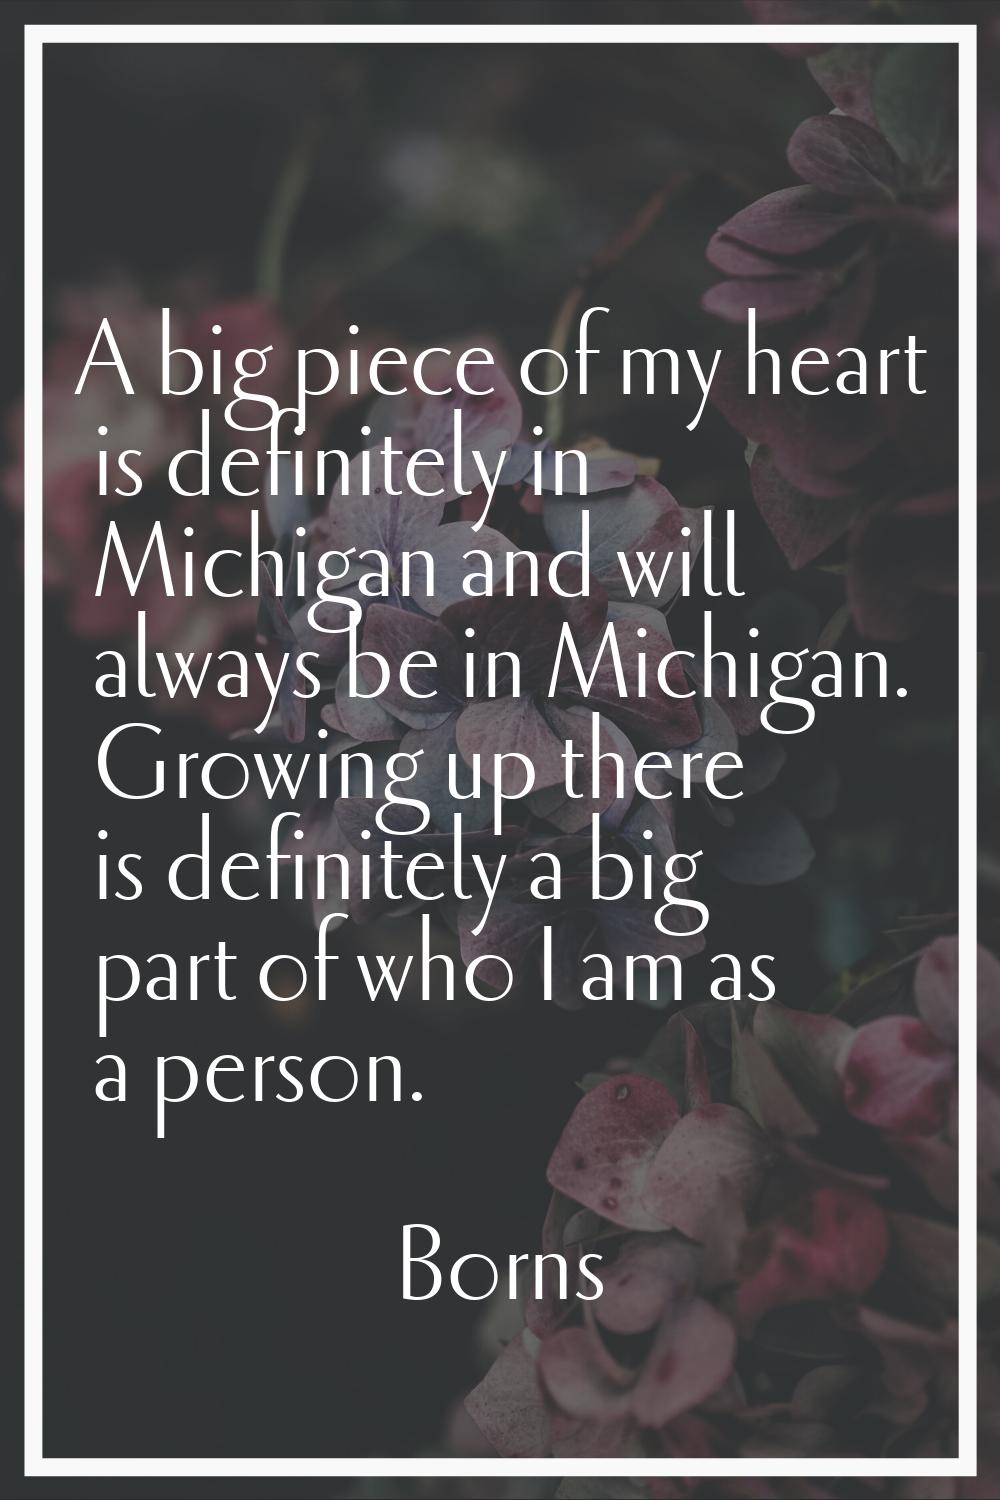 A big piece of my heart is definitely in Michigan and will always be in Michigan. Growing up there 